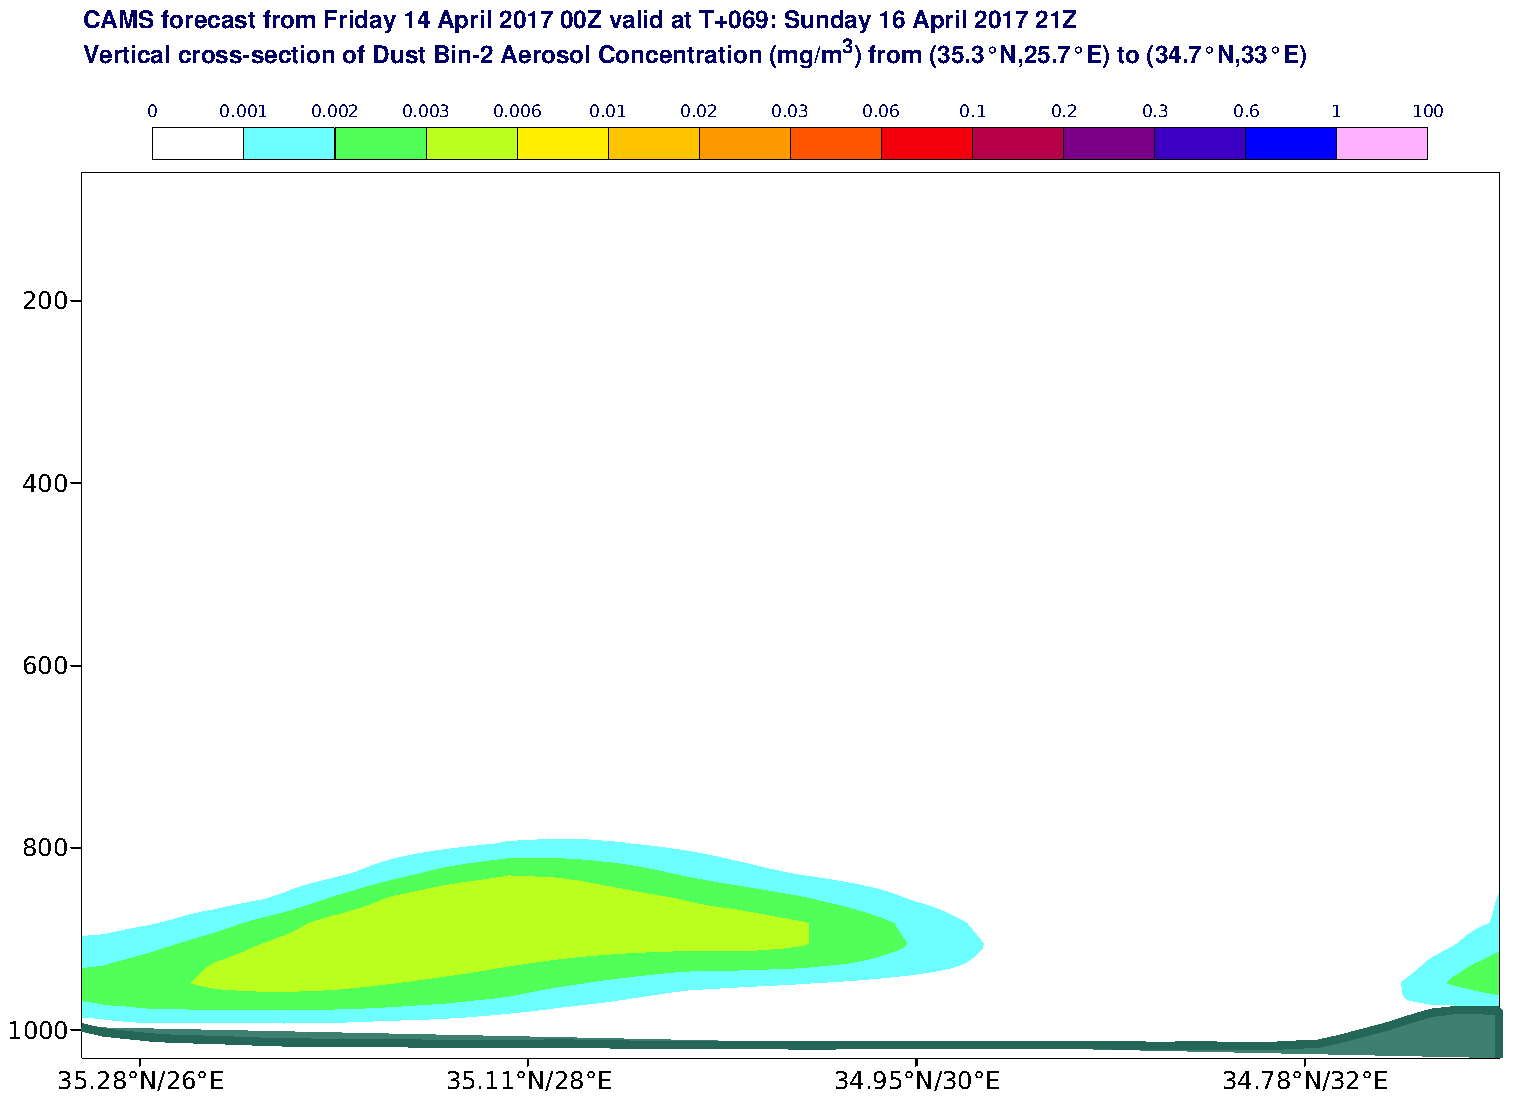 Vertical cross-section of Dust Bin-2 Aerosol Concentration (mg/m3) valid at T69 - 2017-04-16 21:00